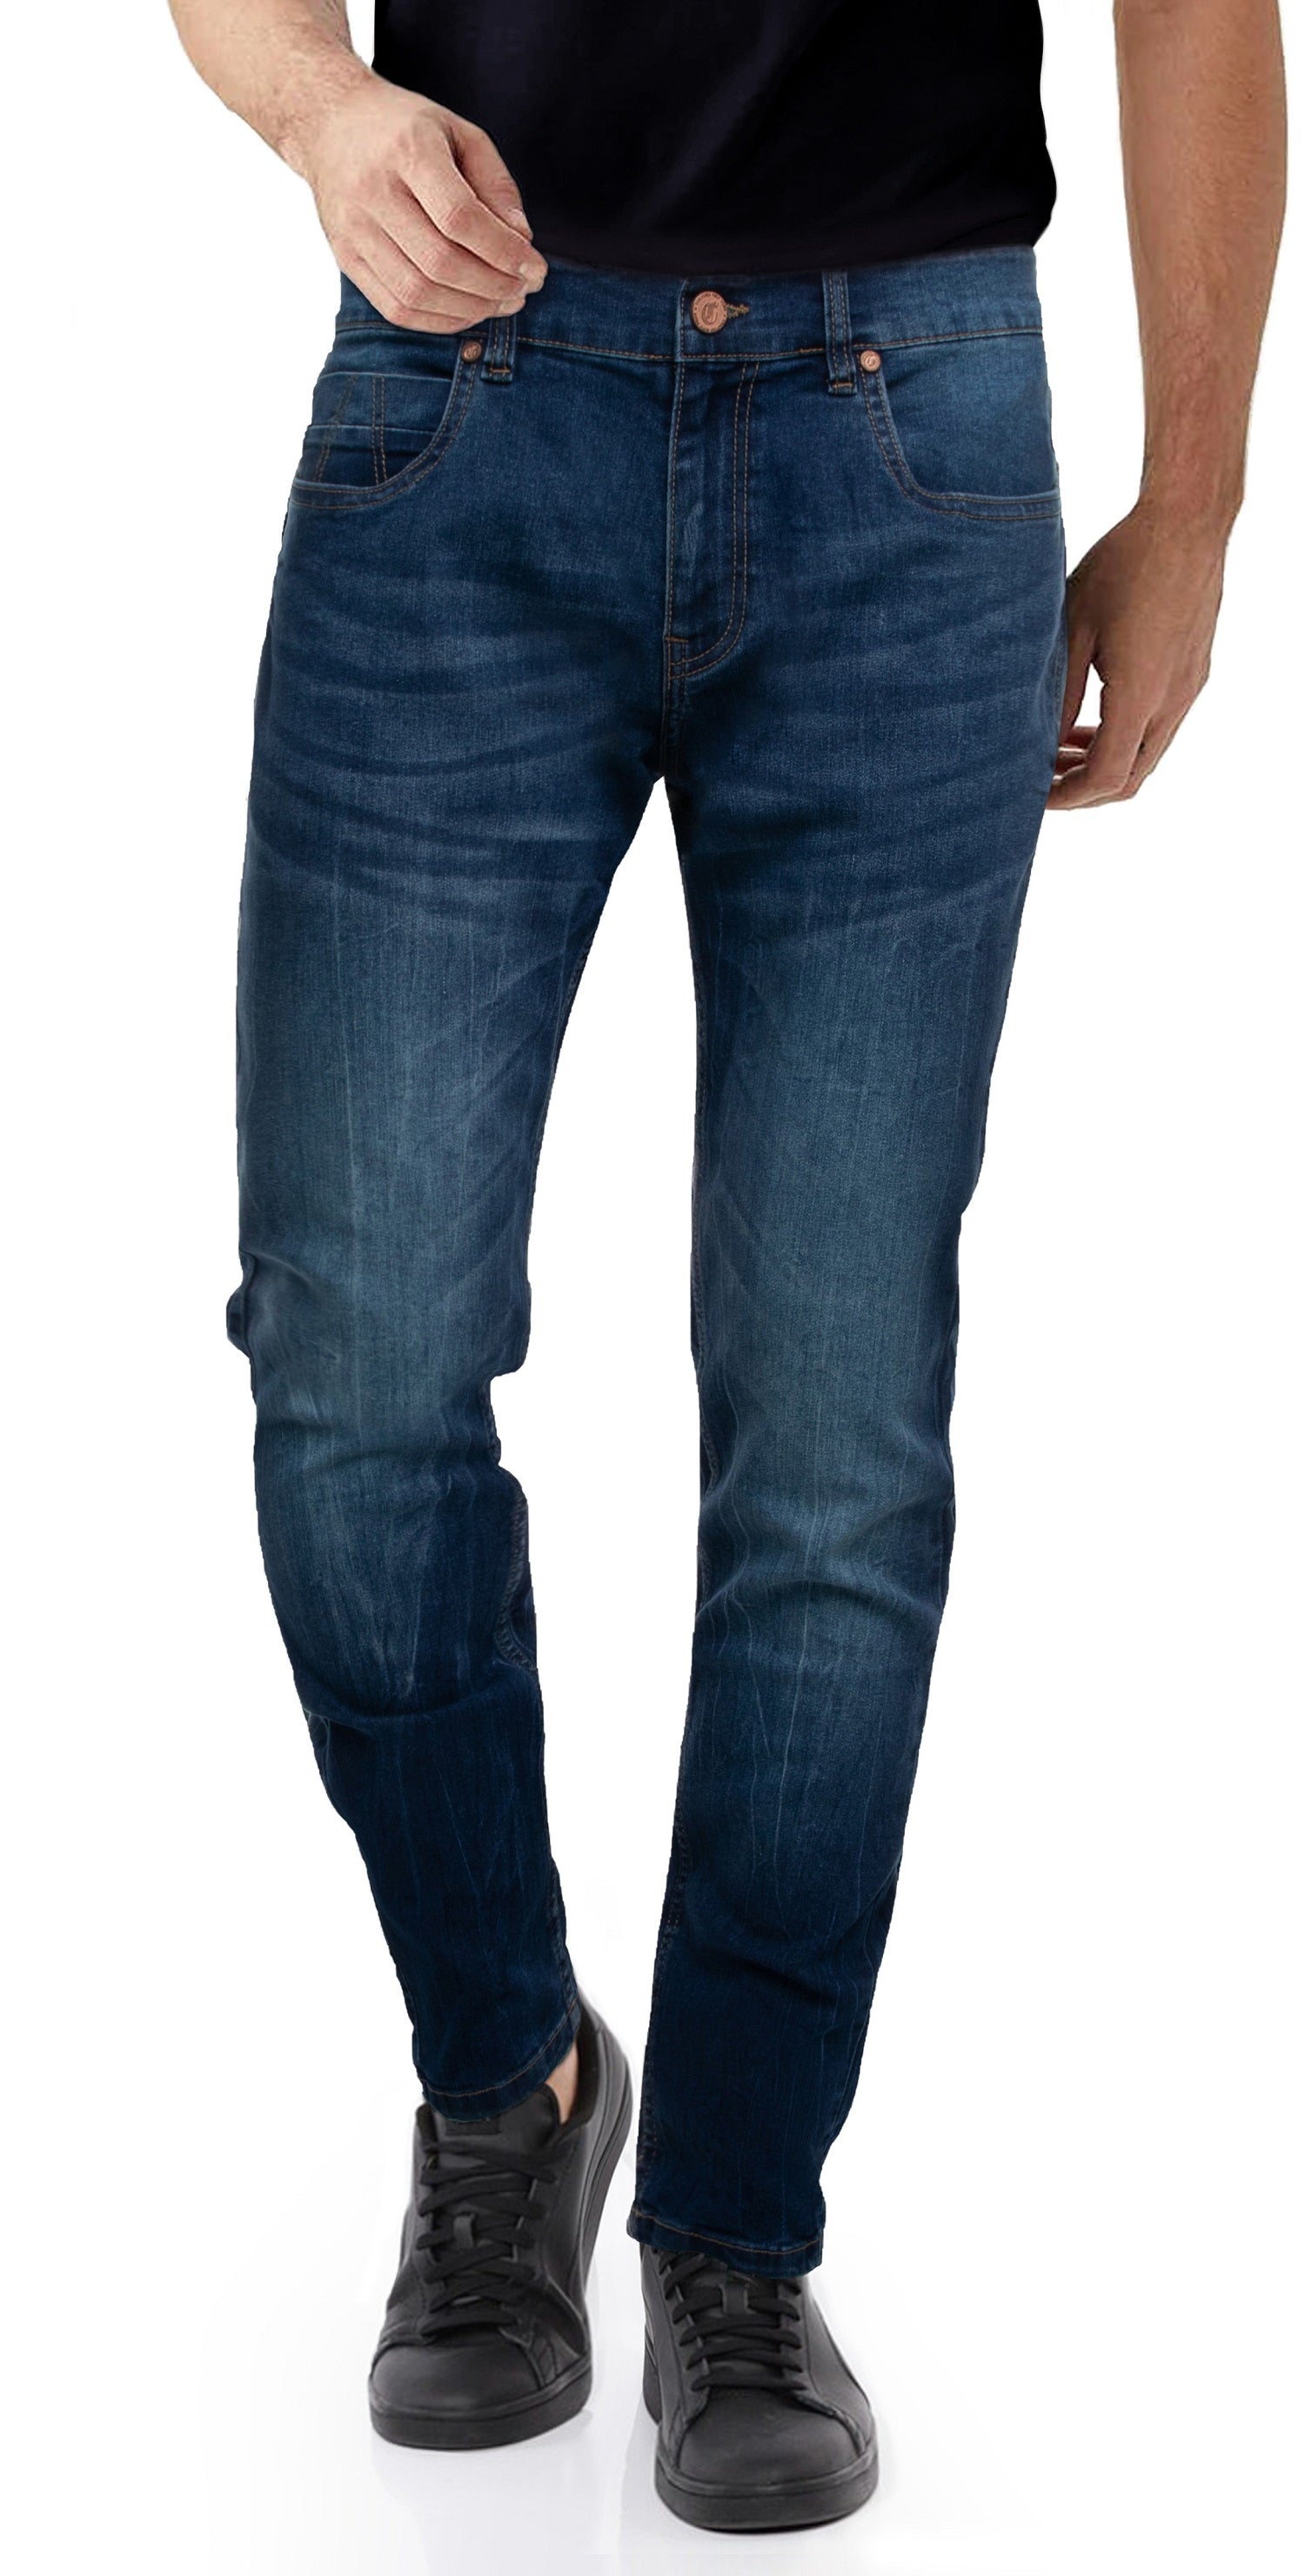 CULTURA AZURE Slim Fit Stretch Jeans for Men – X-RAY JEANS